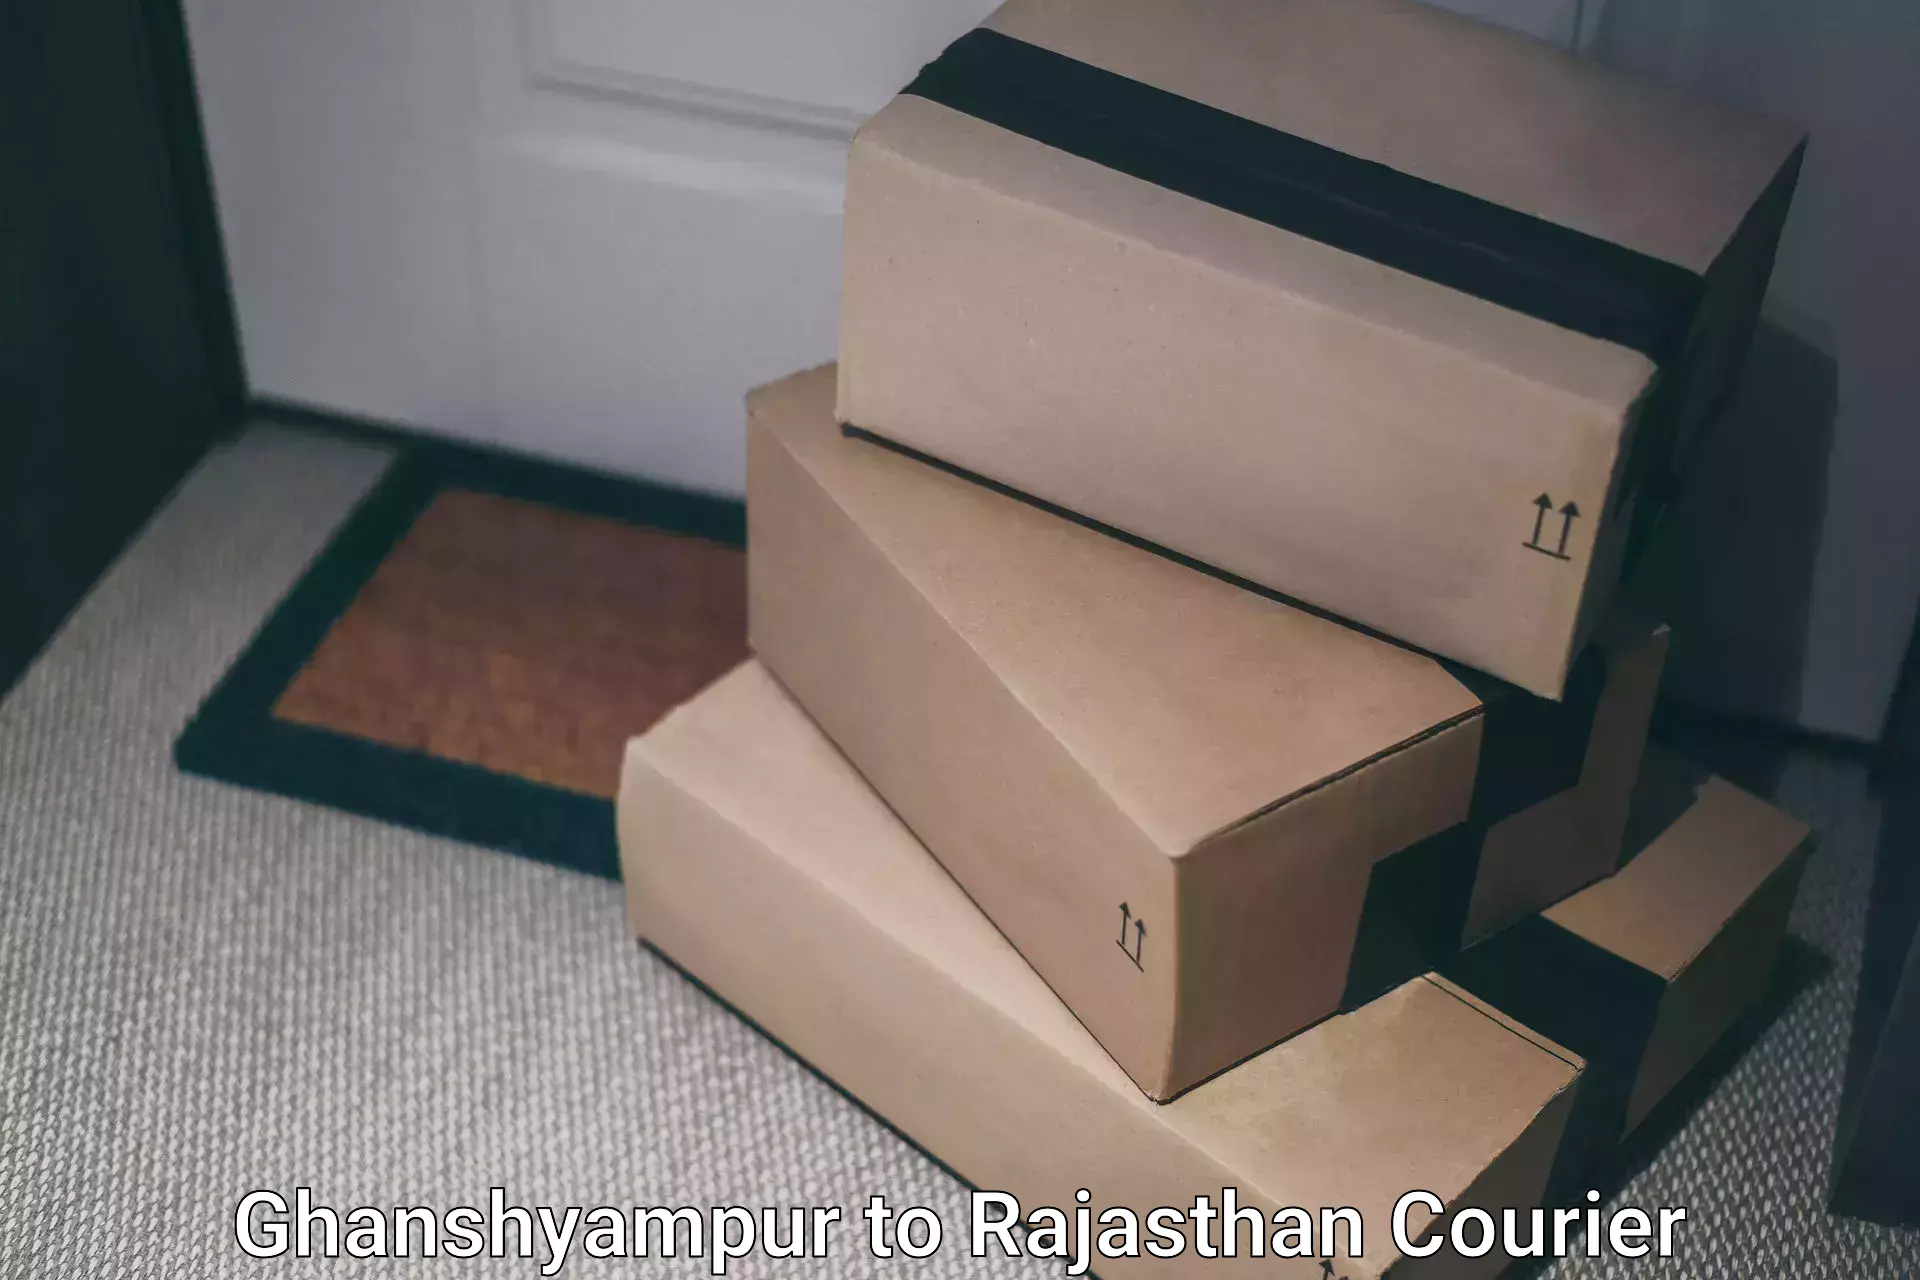 Package delivery network Ghanshyampur to Sri Ganganagar